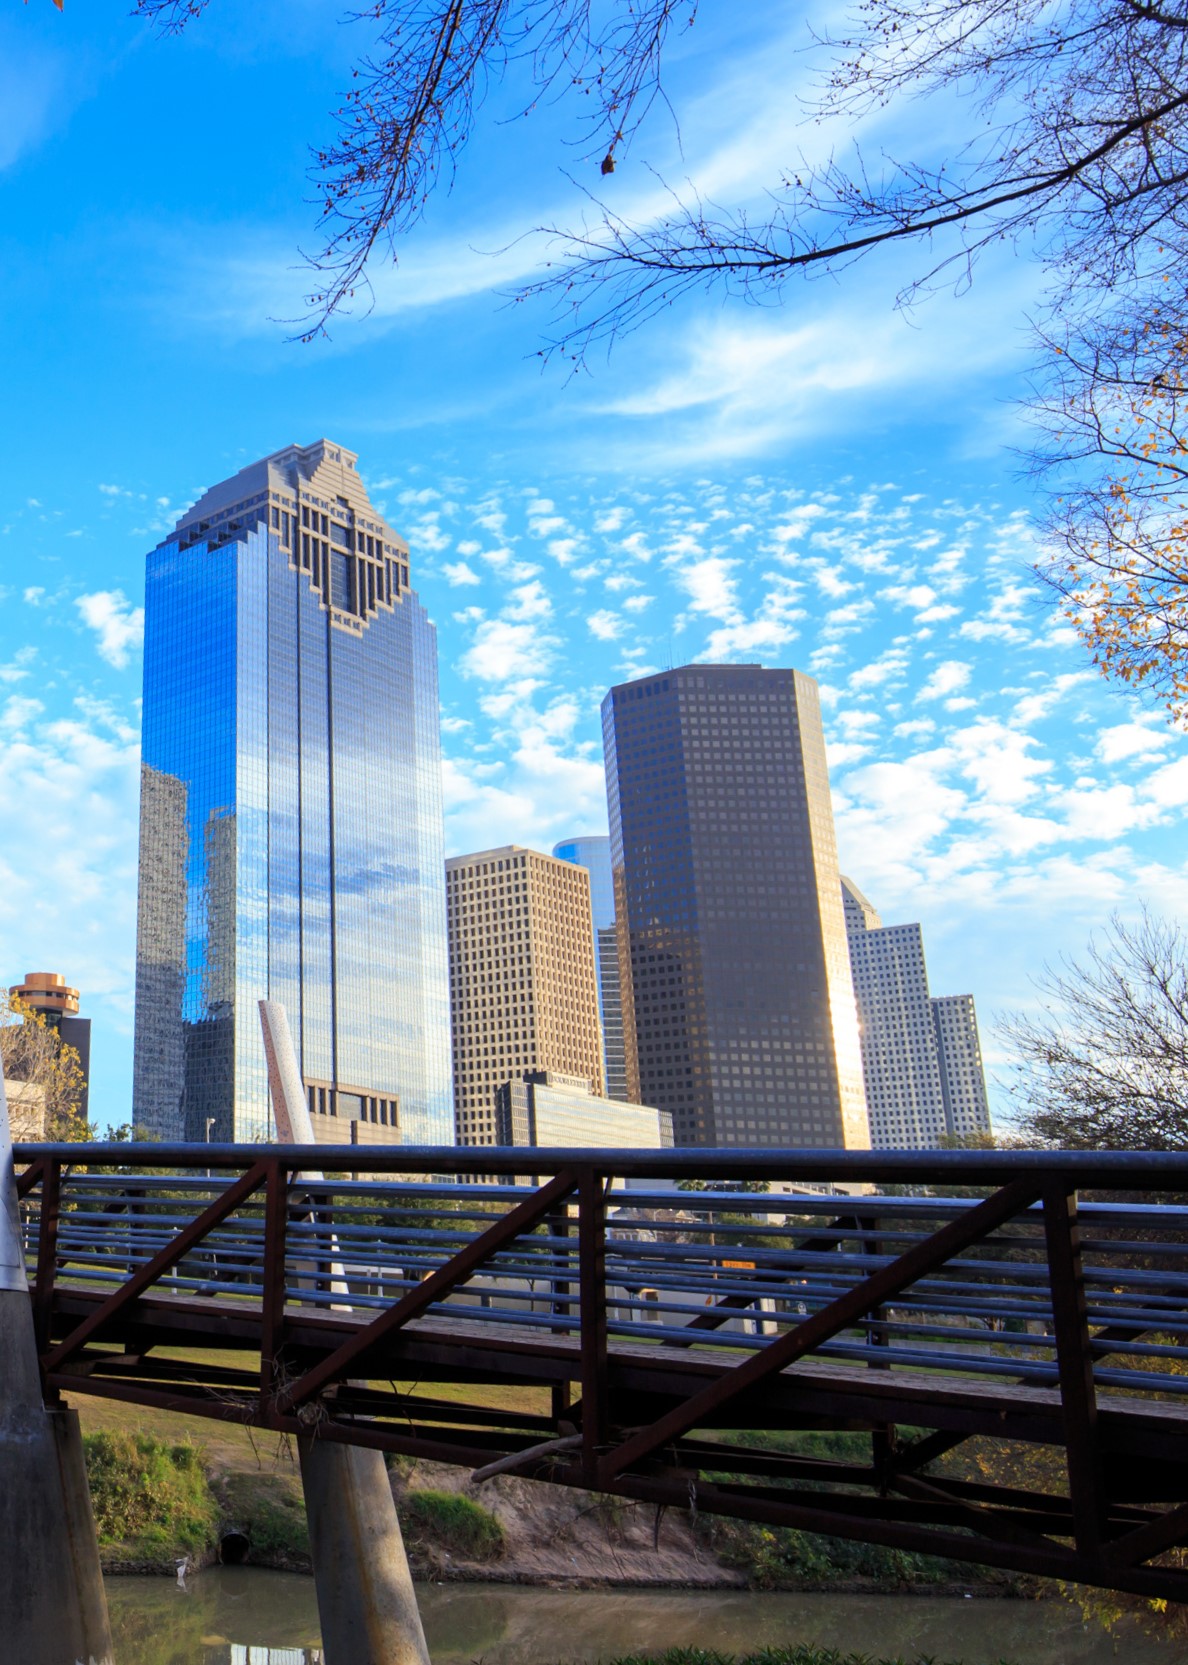 Houston Texas Skyline with modern skyscrapers and blue sky view from park